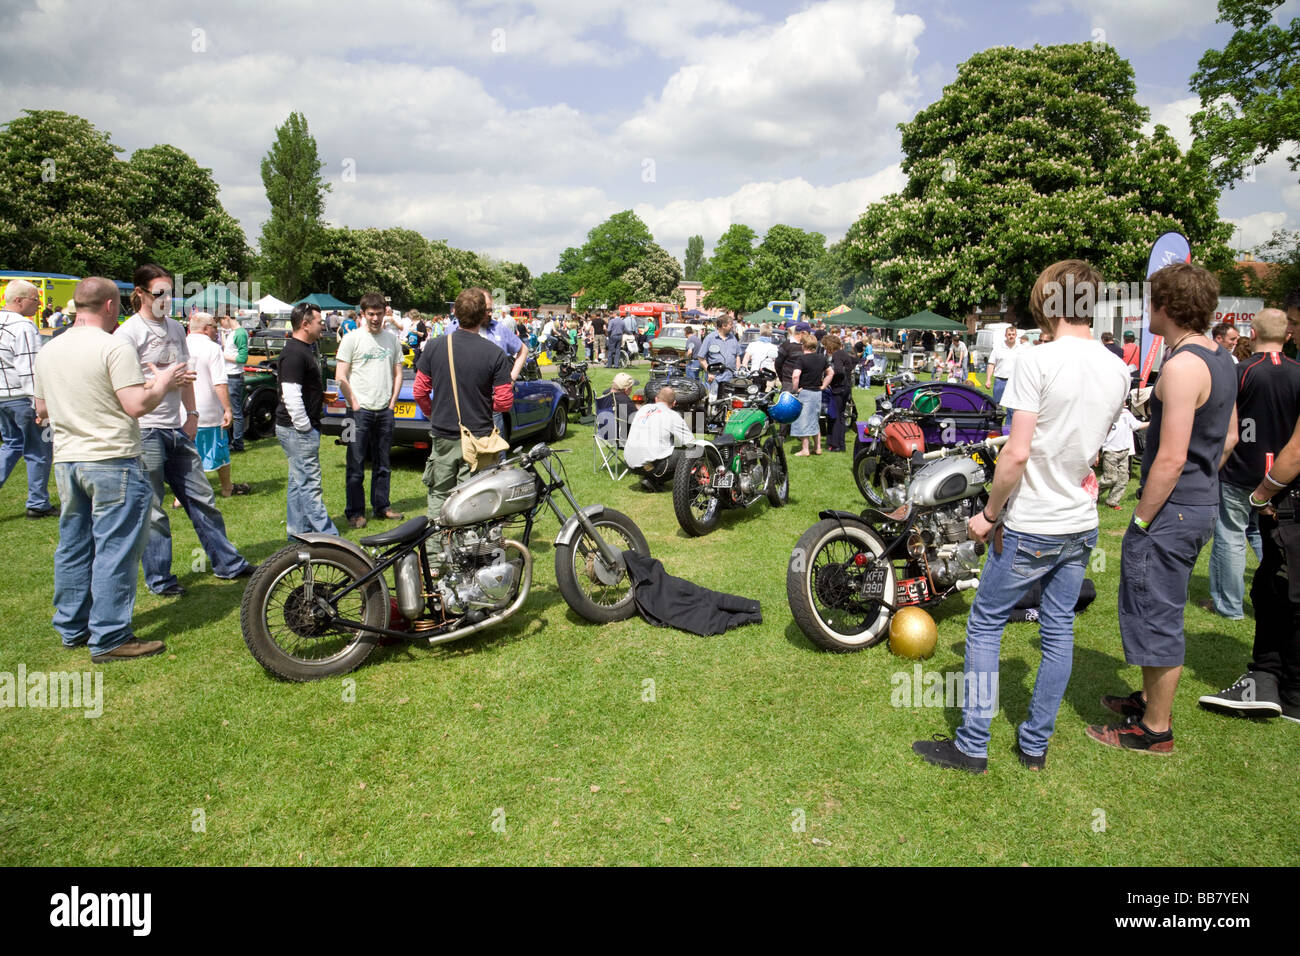 Des foules de gens au Wallingford Classic car and motorcycle rally, Wallingford, Oxfordshire, UK Banque D'Images